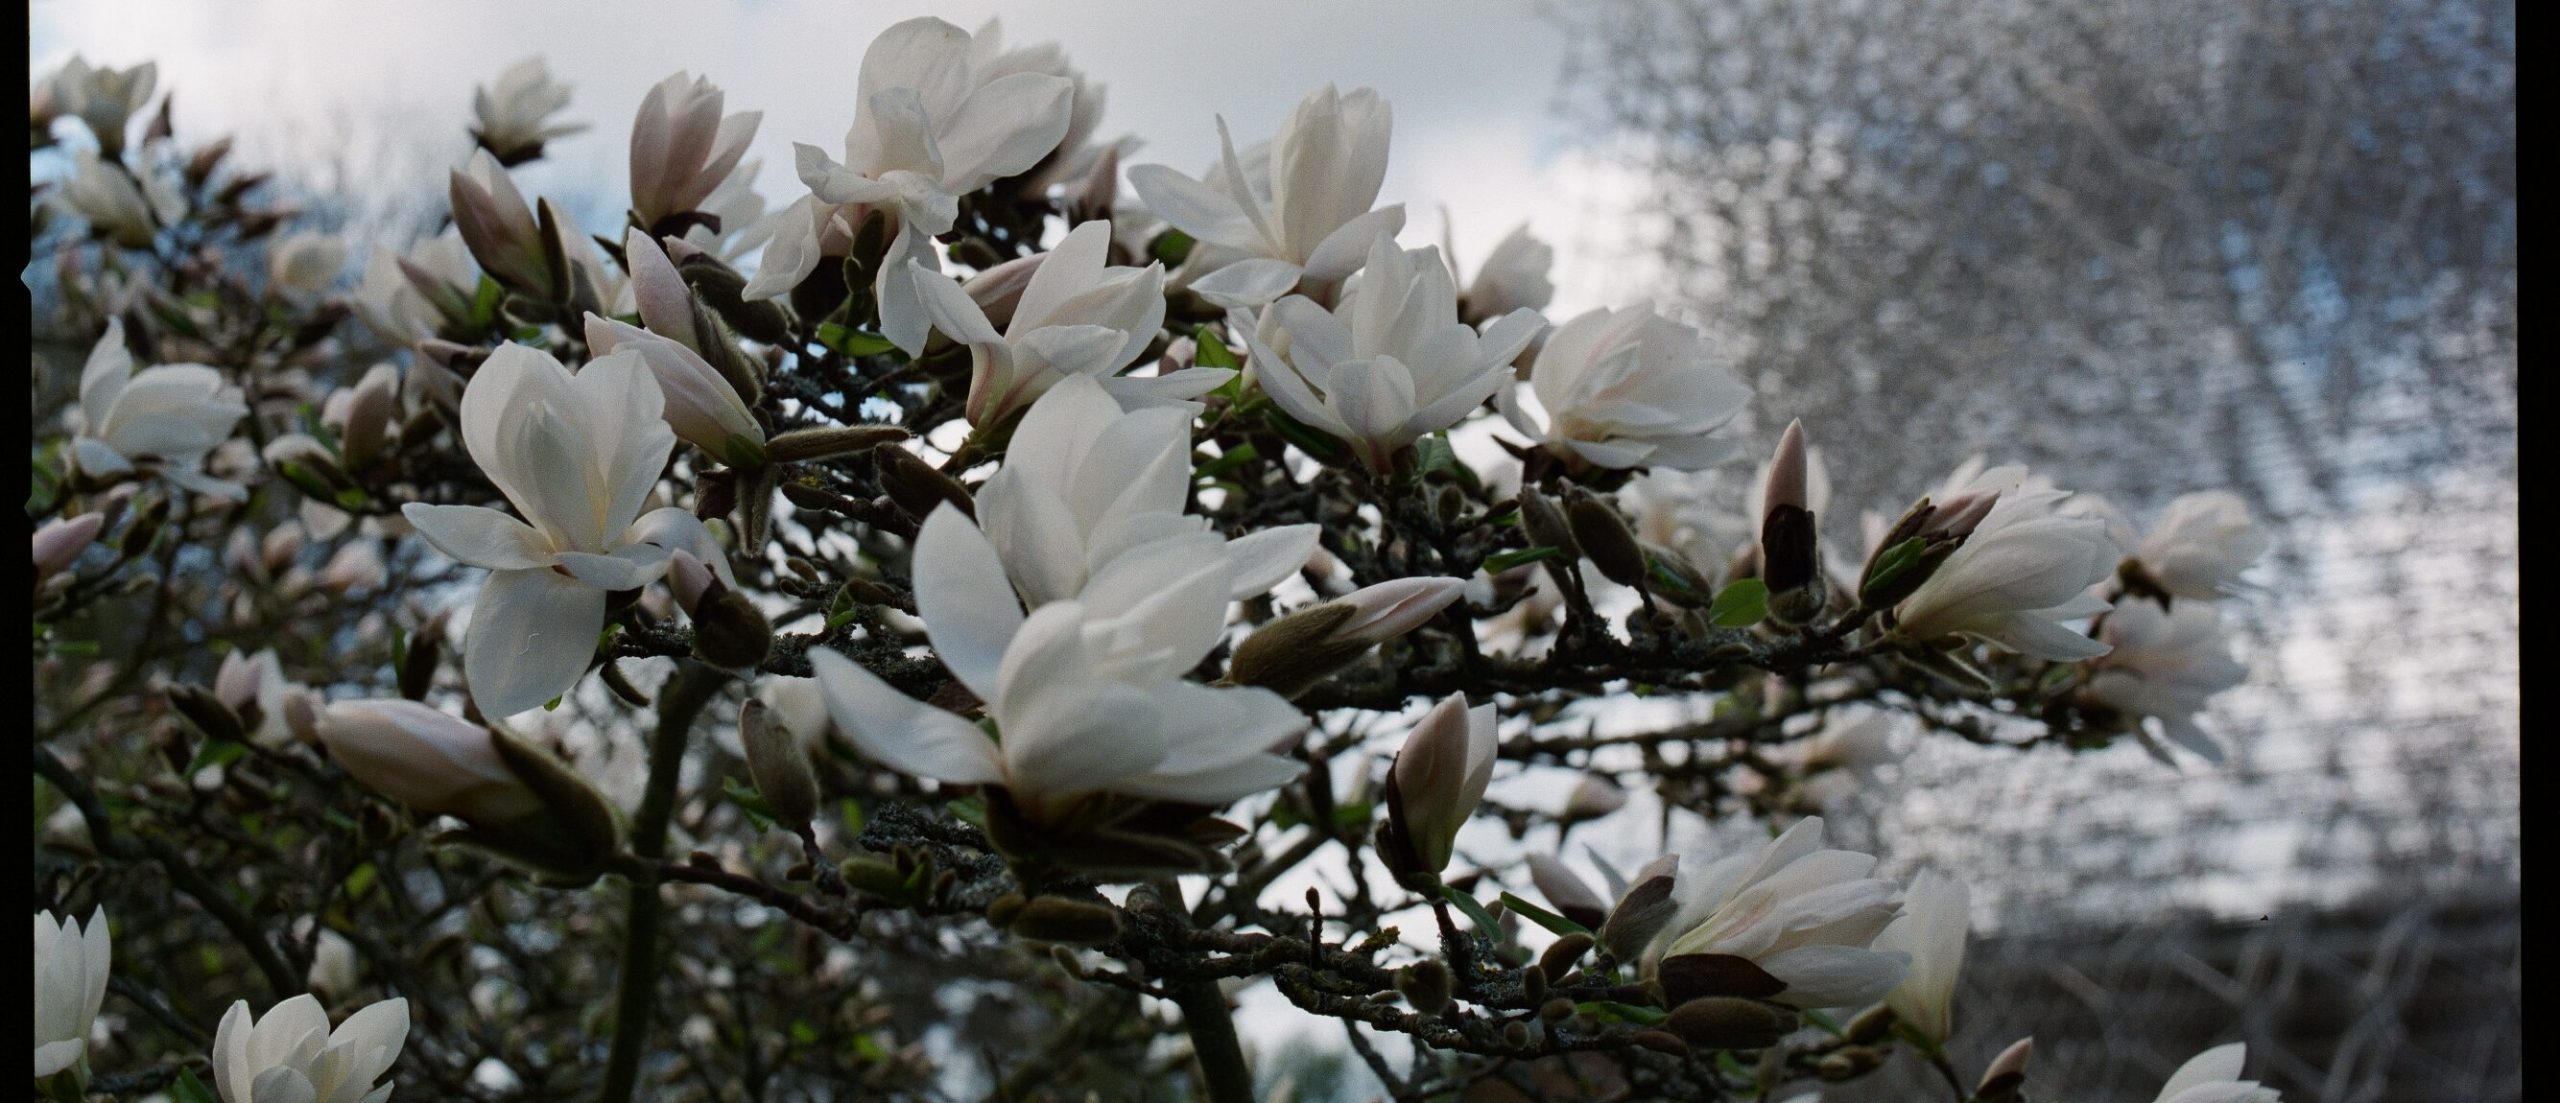 white Magnolia's at kew gardens by Jim Washburn, at oru Space, Dulwich Festival 2023